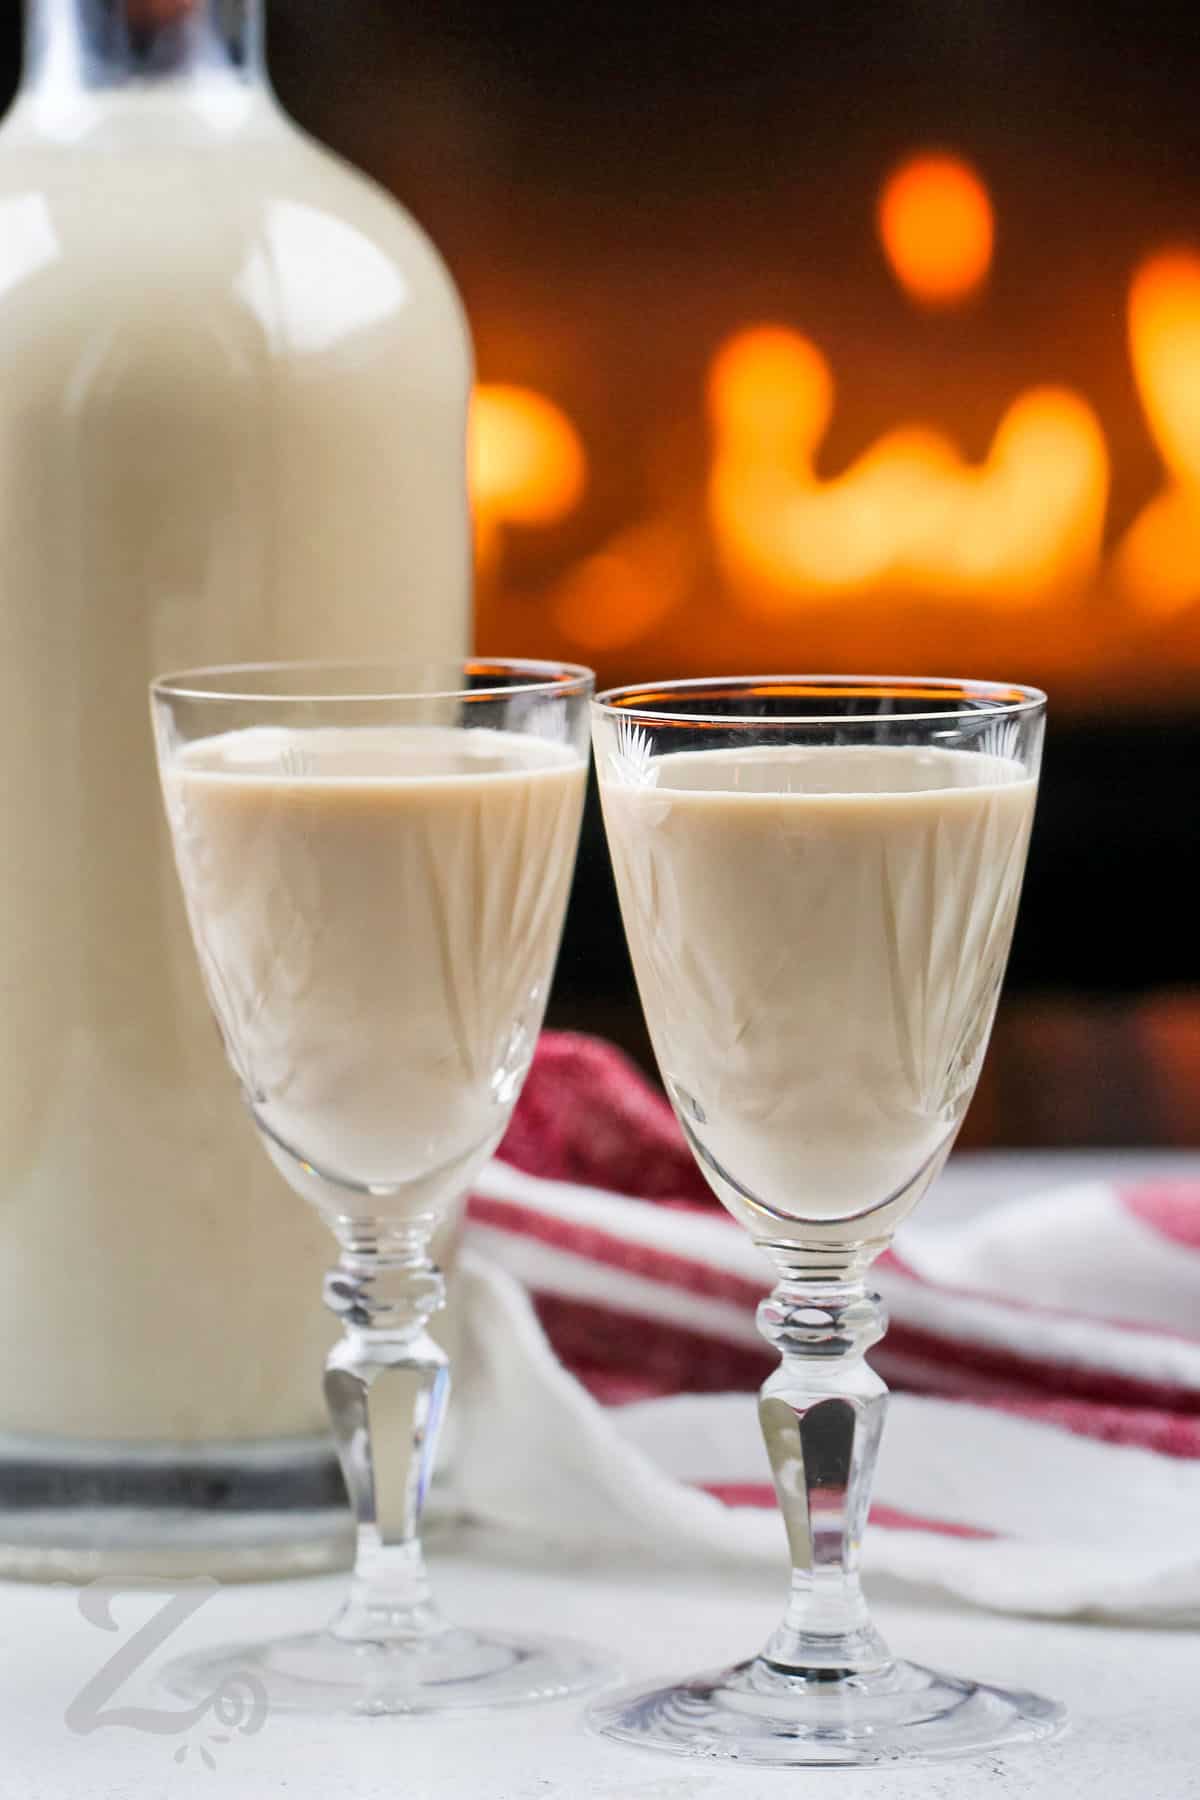 Two glassed of homemade Irish cream with a bottle in the background